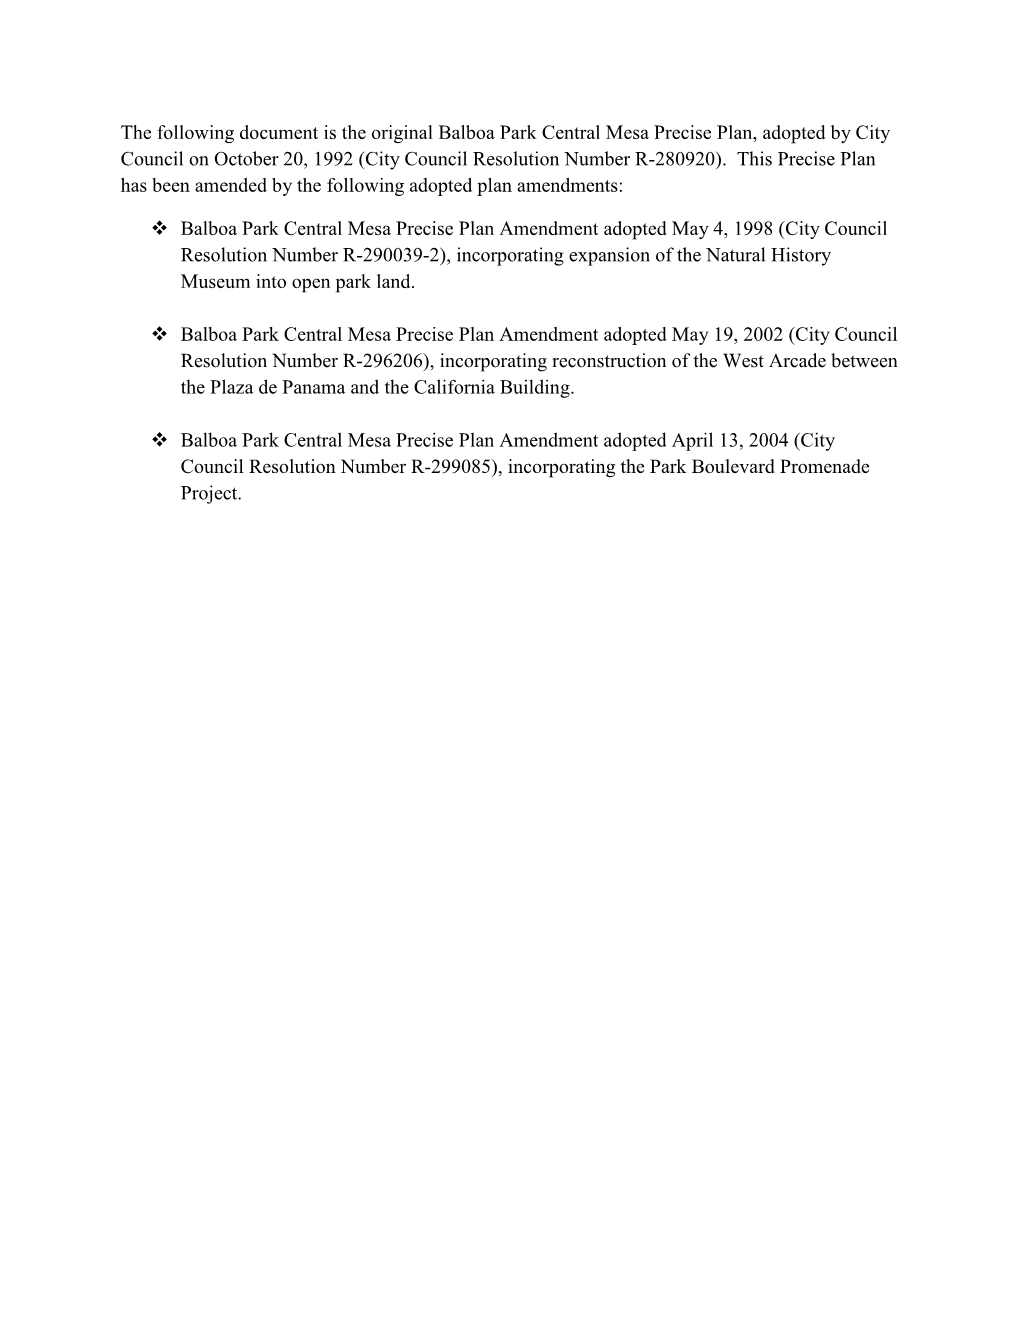 The Following Document Is the Original Balboa Park Central Mesa Precise Plan, Adopted by City Council on October 20, 1992 (City Council Resolution Number R-280920)